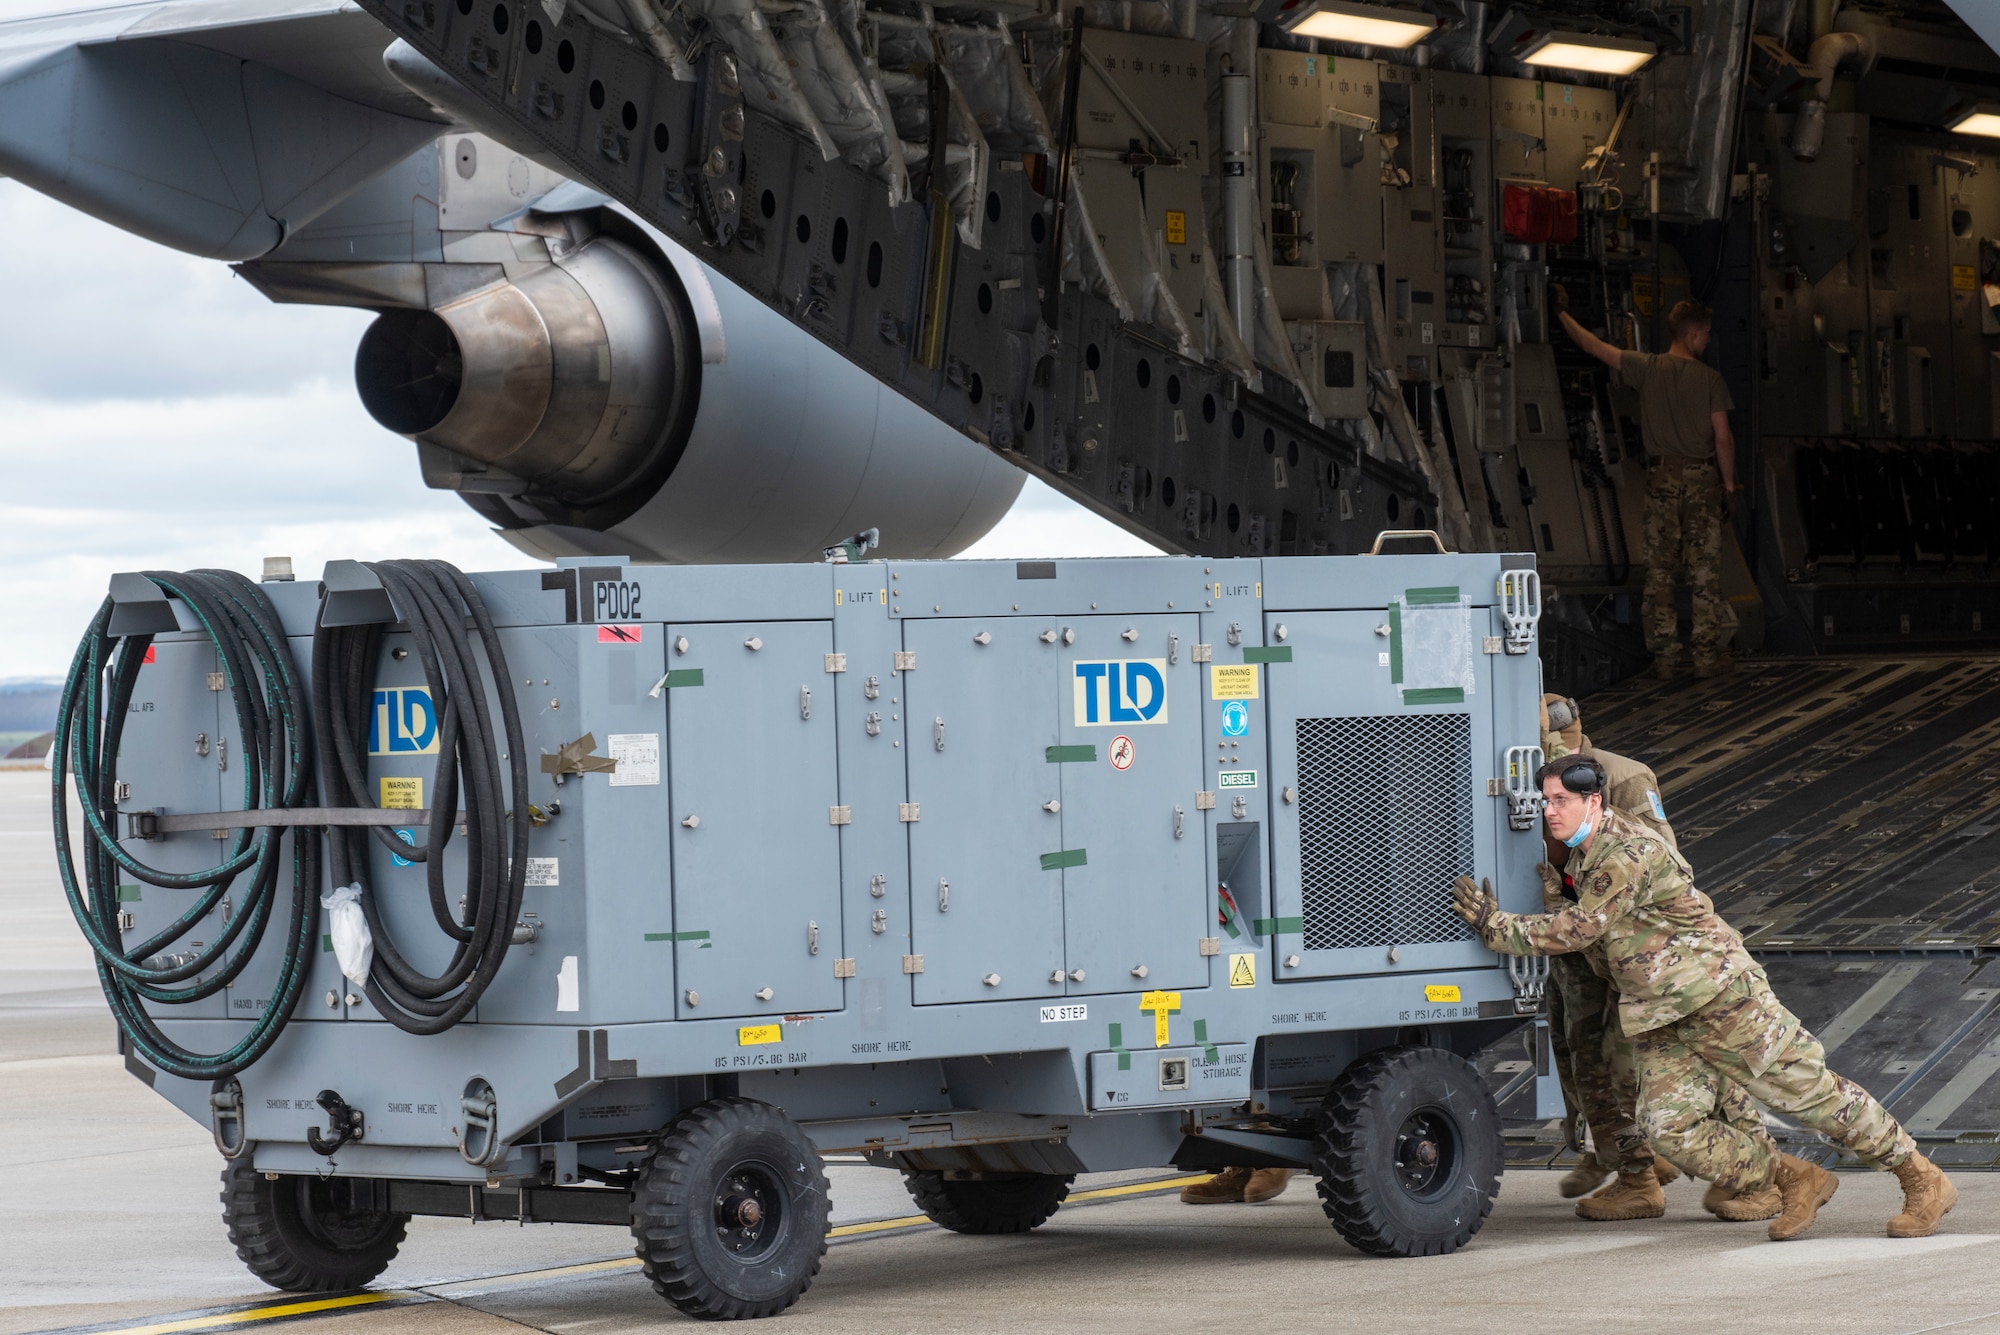 Airmen from the 726th Air Mobility squadron unload cargo from a C-17 Globemaster III aircraft.